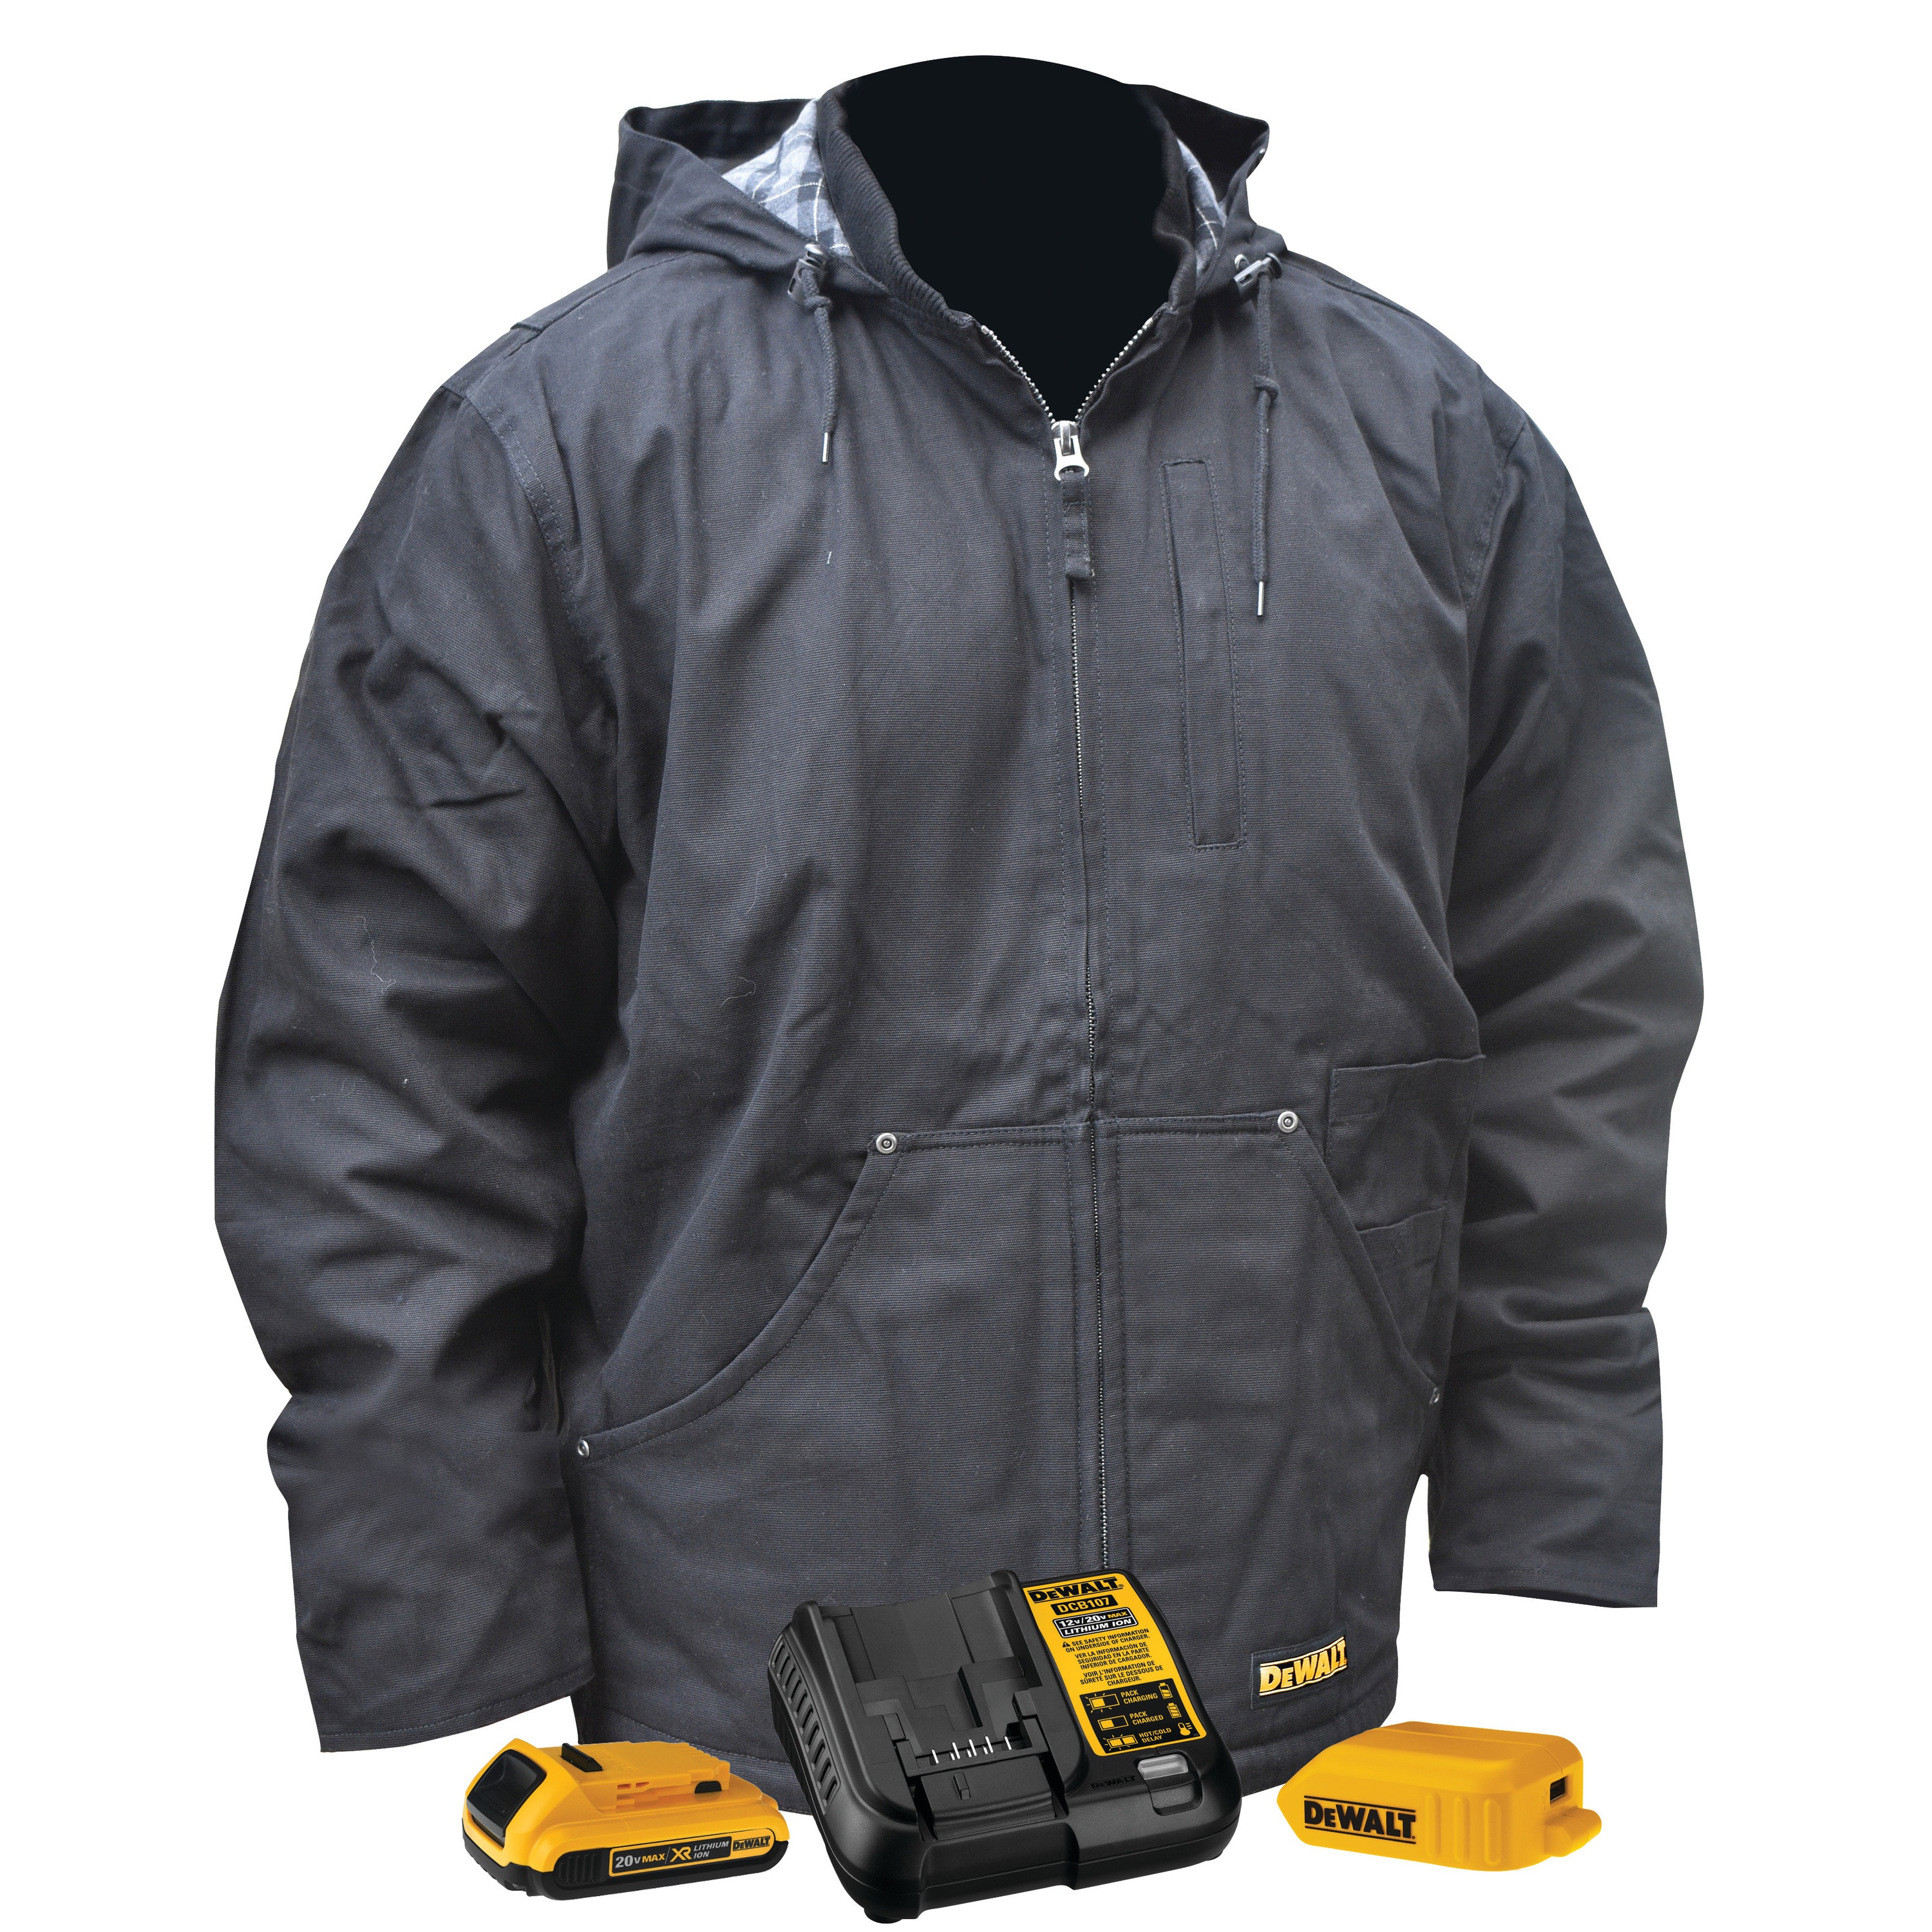 Black, heavy duty, heated jacket with its complete kit